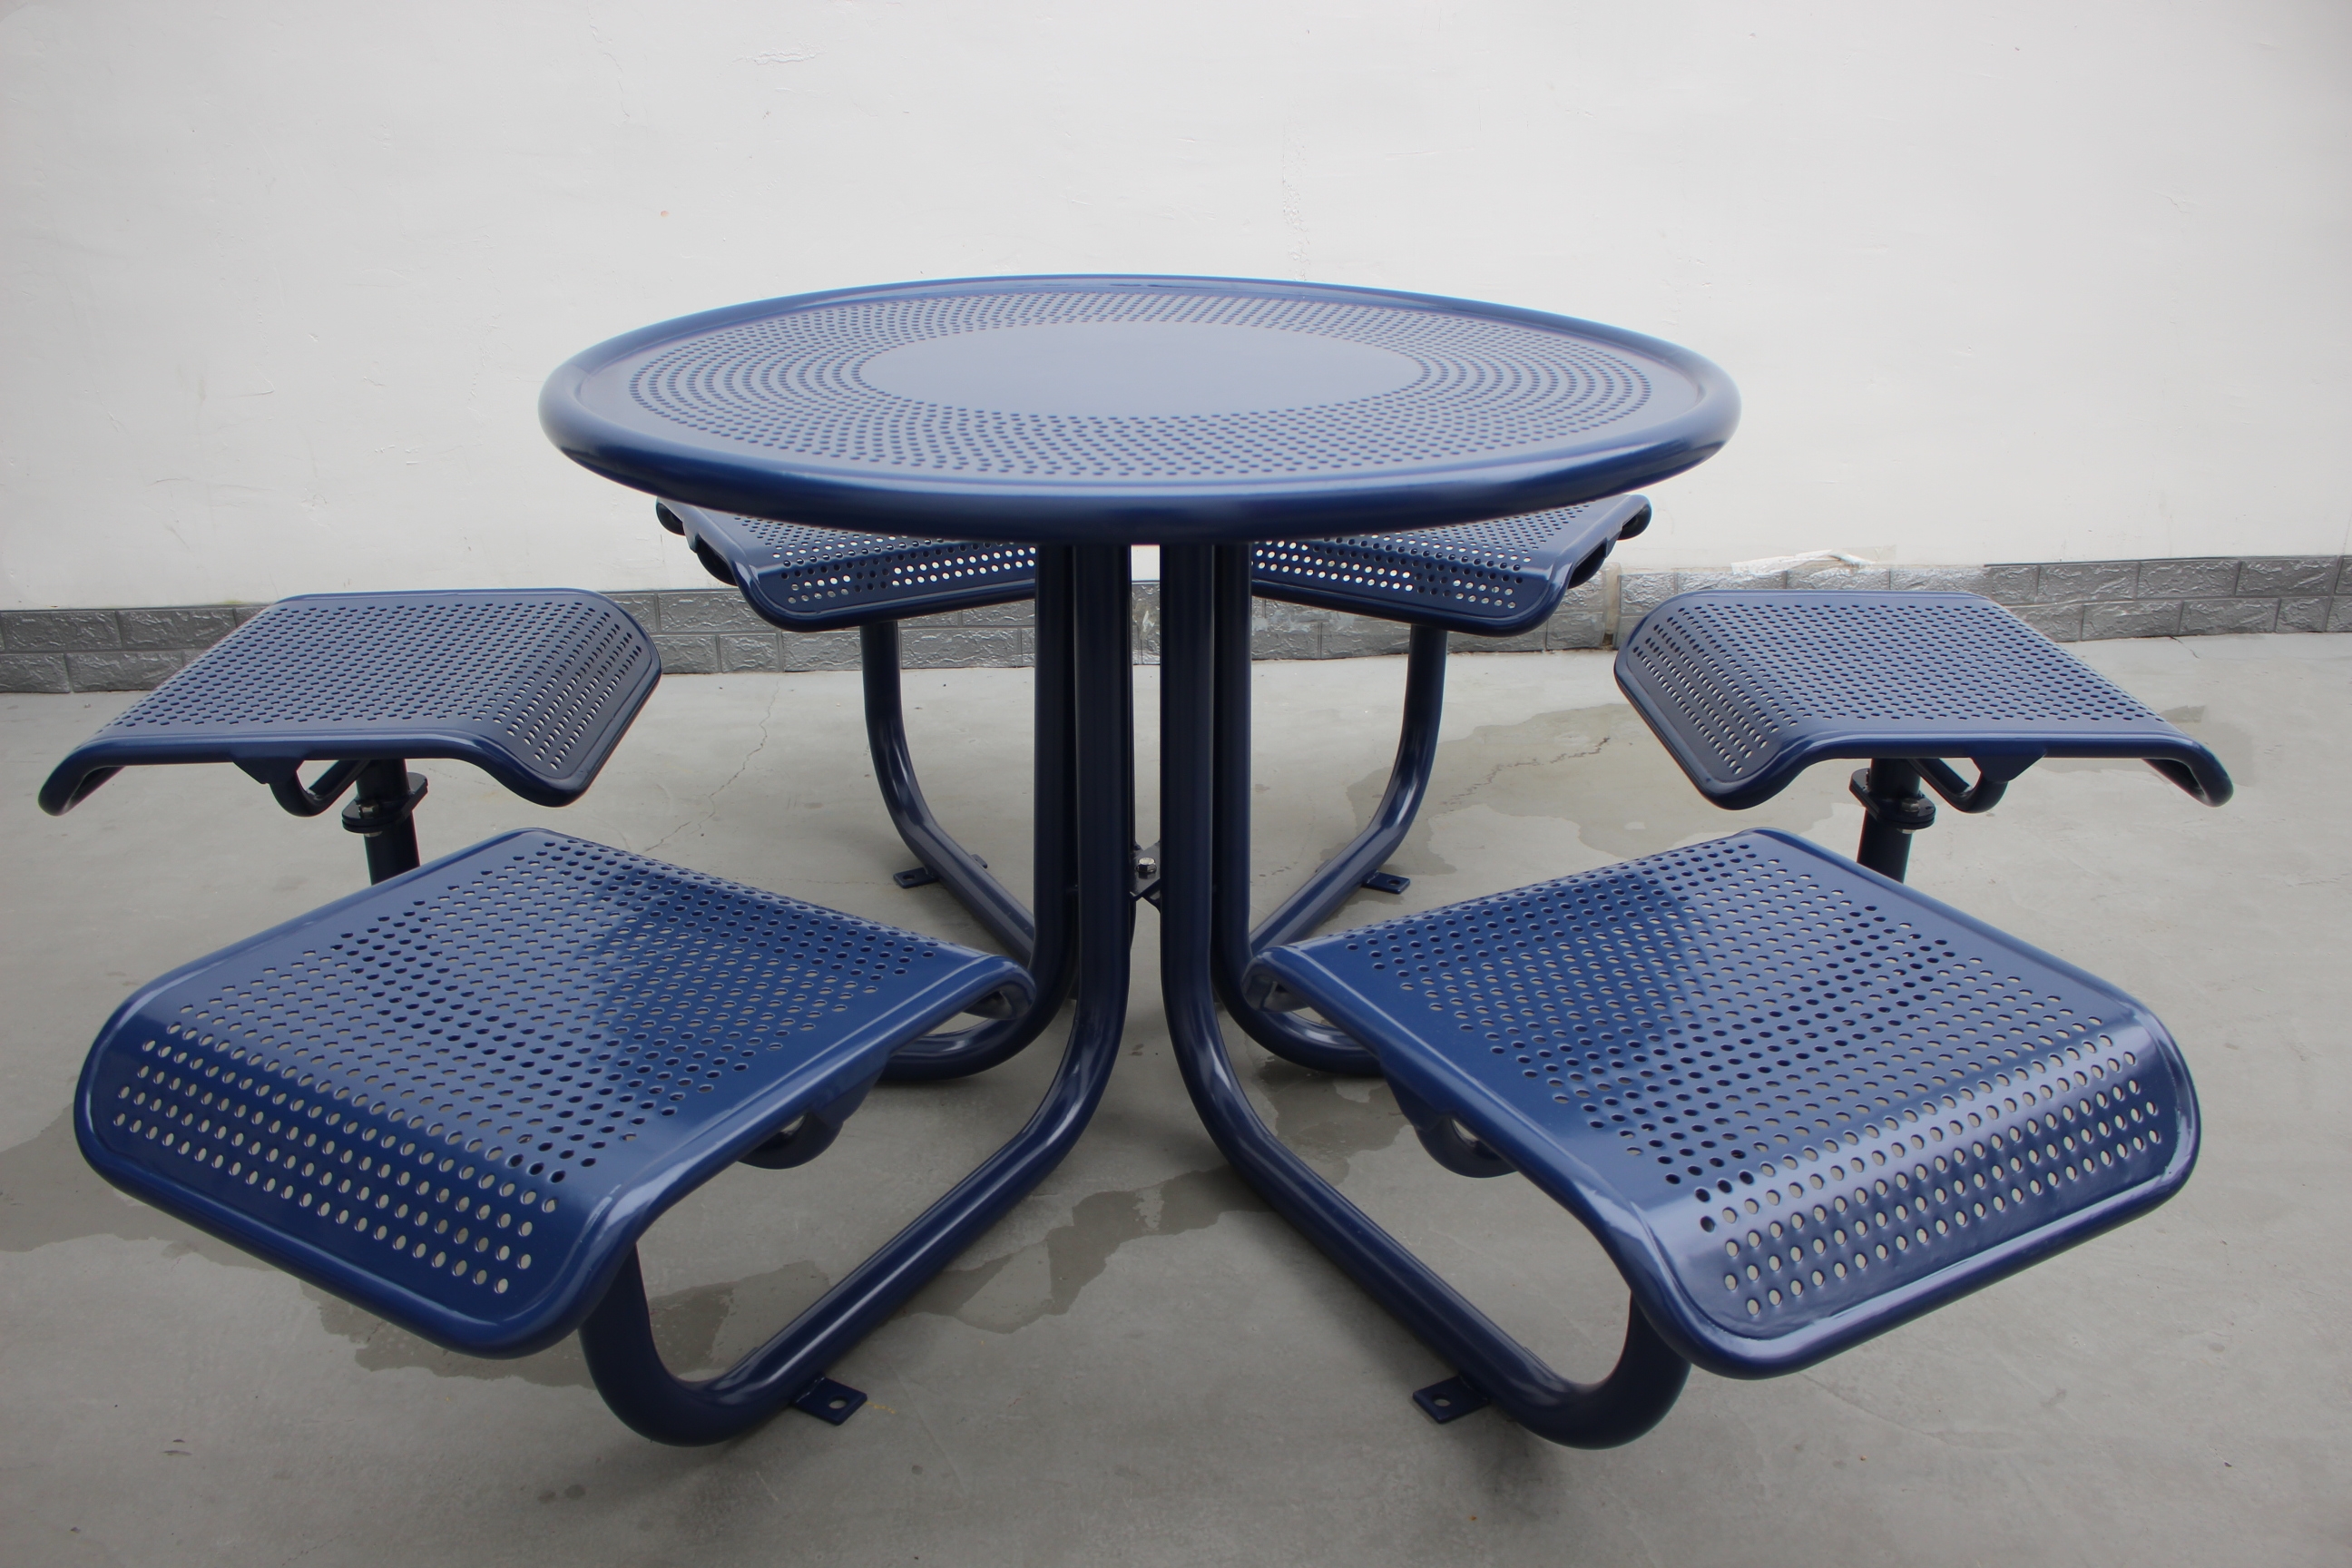 Perforated metal urban street steel round table with six chairs commercial outdoor picnic tables outside furniture China